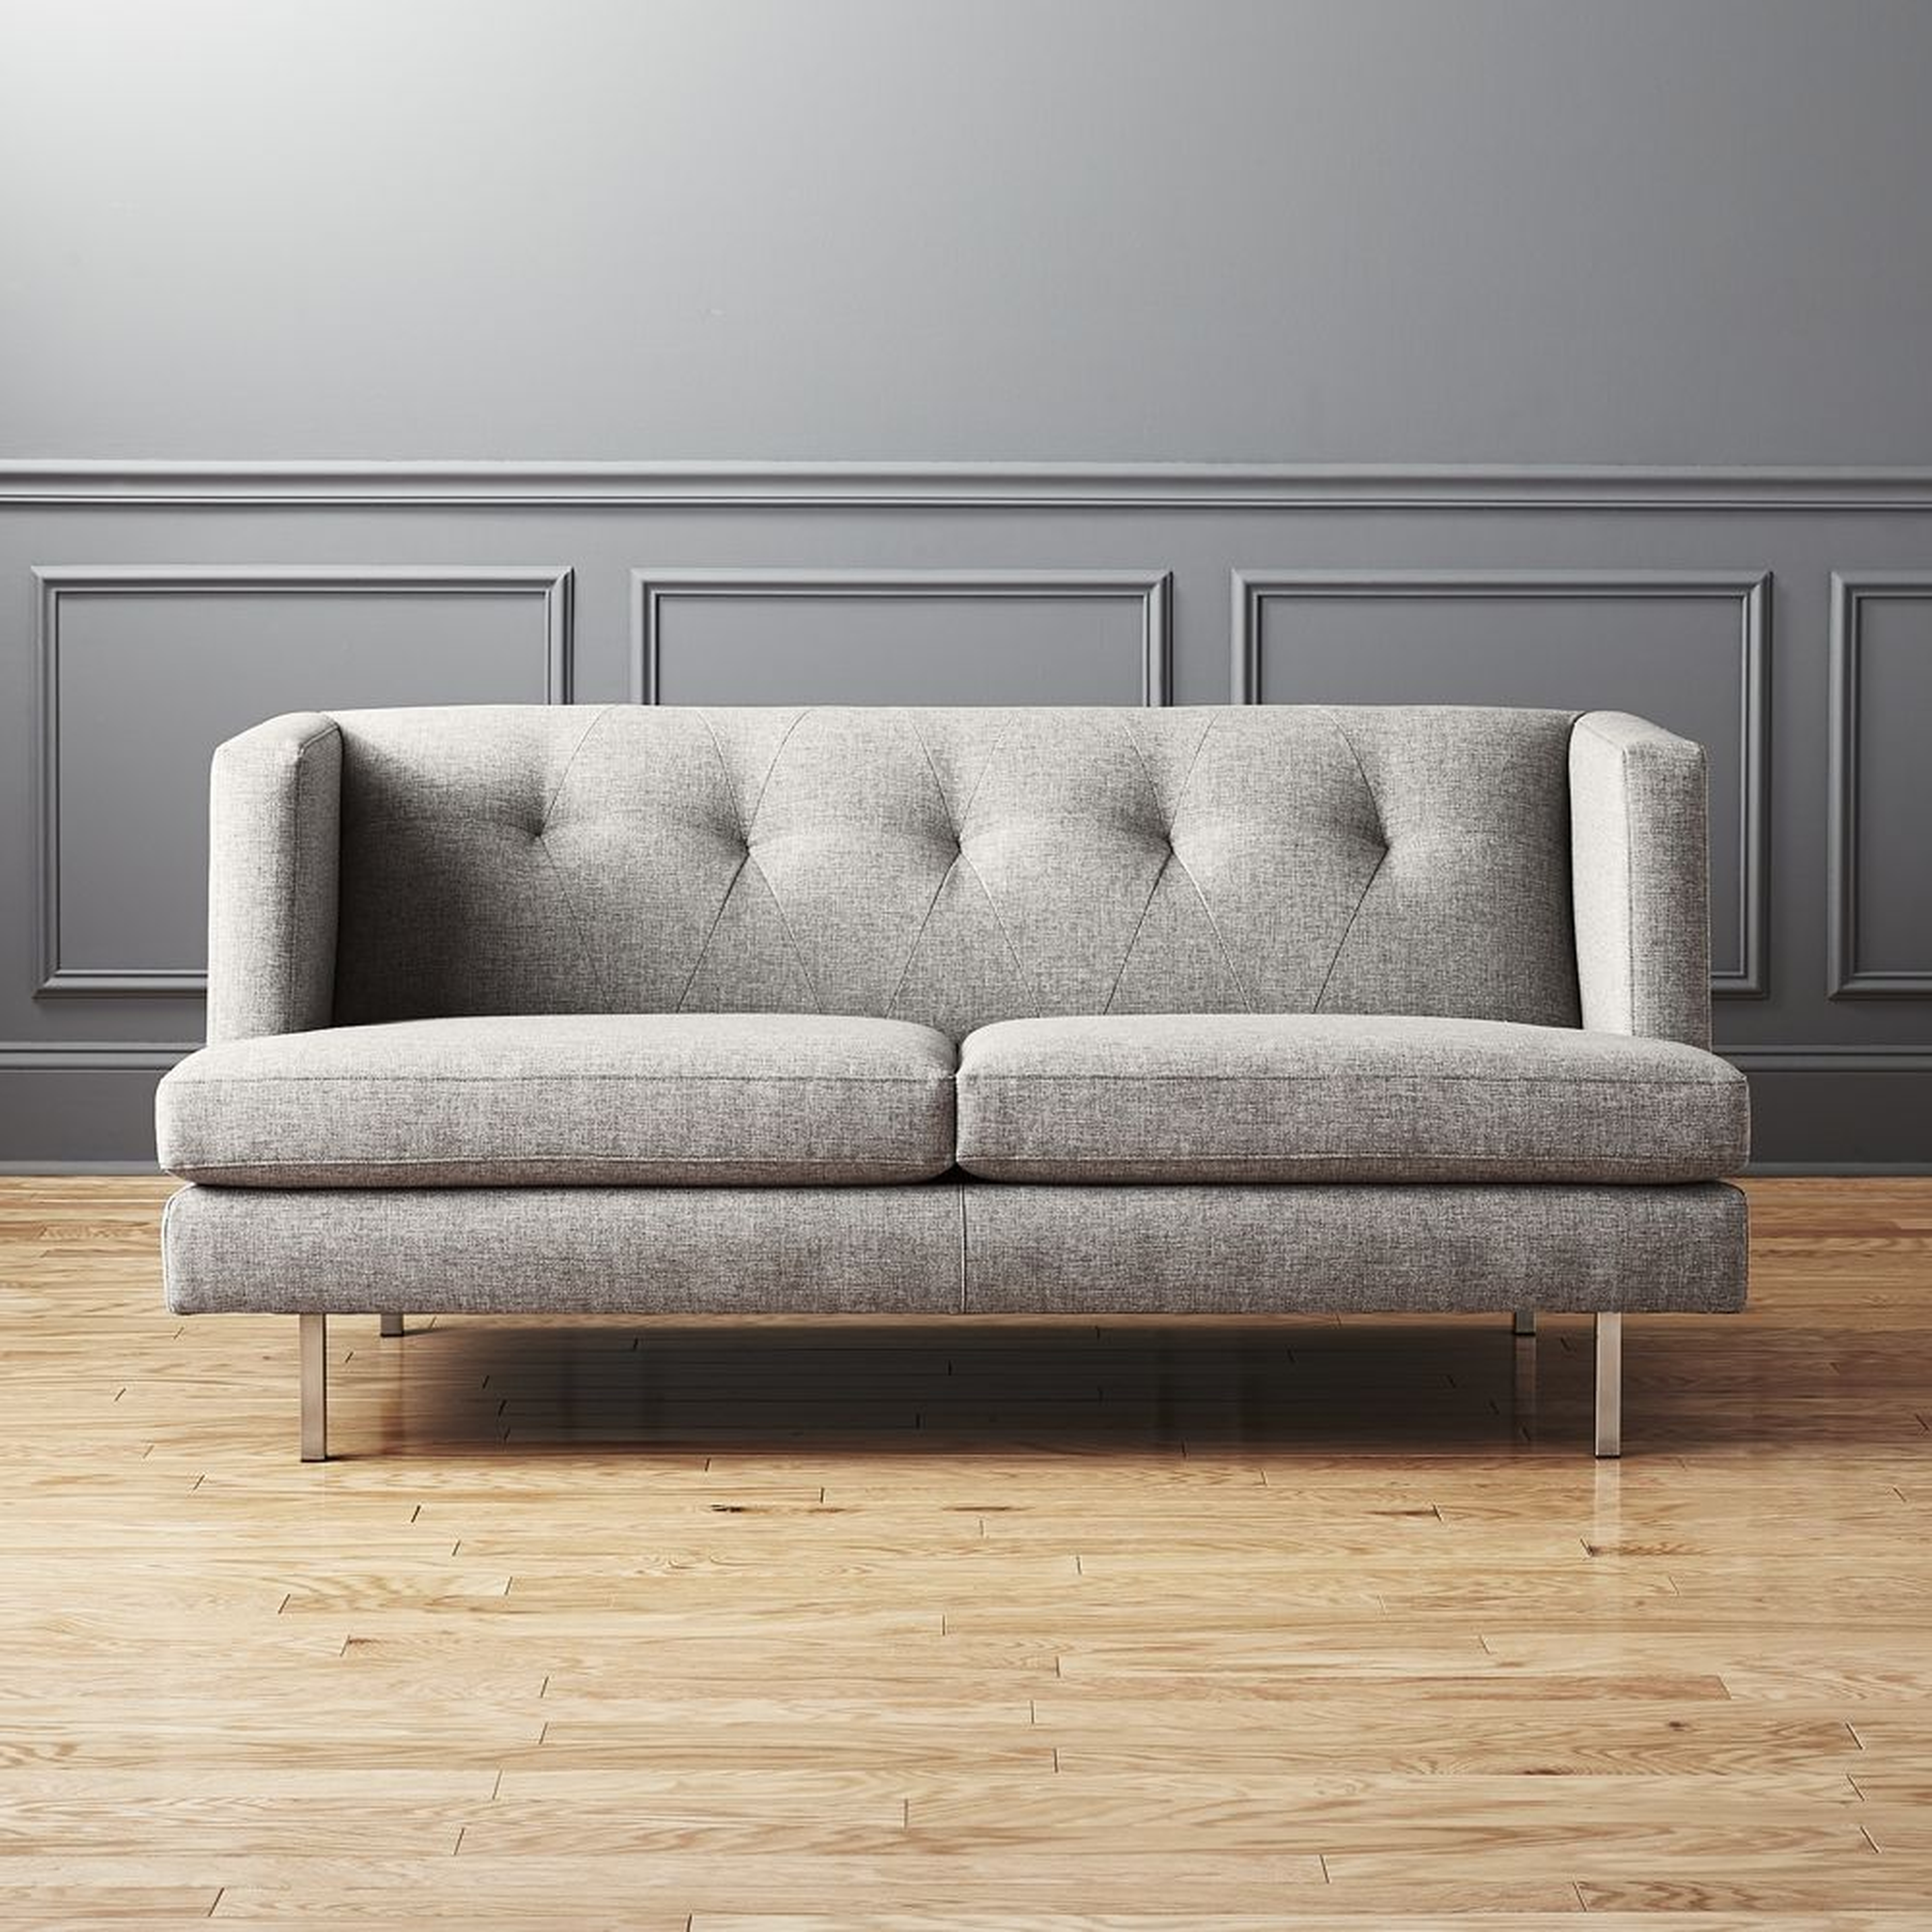 avec grey apartment sofa with brushed stainless steel legs - CB2